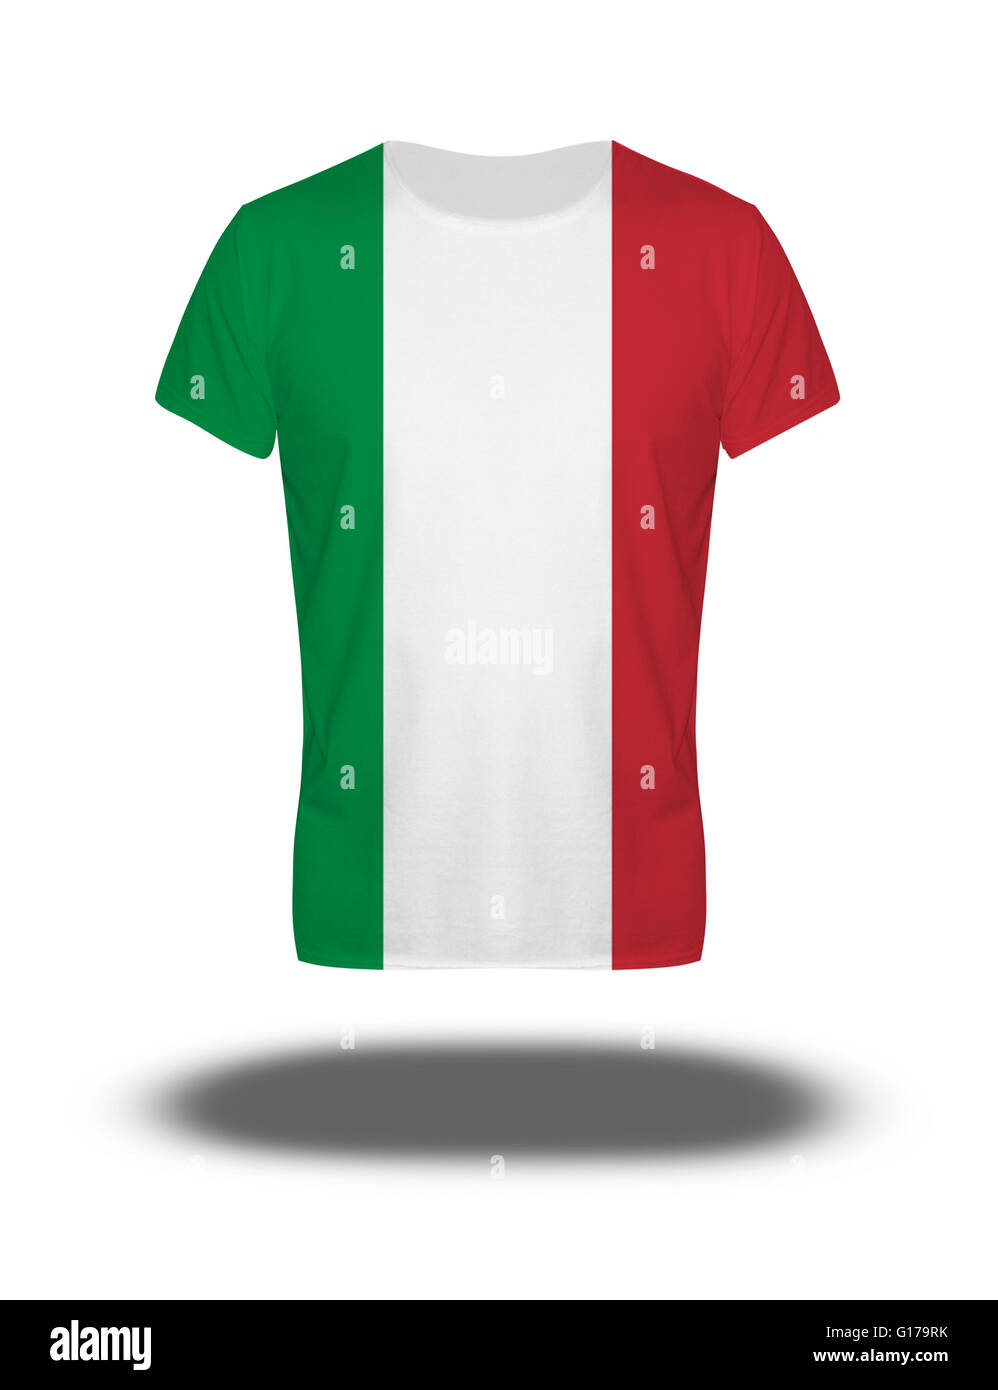 Italy flag t-shirt on white background with shadow Stock Photo